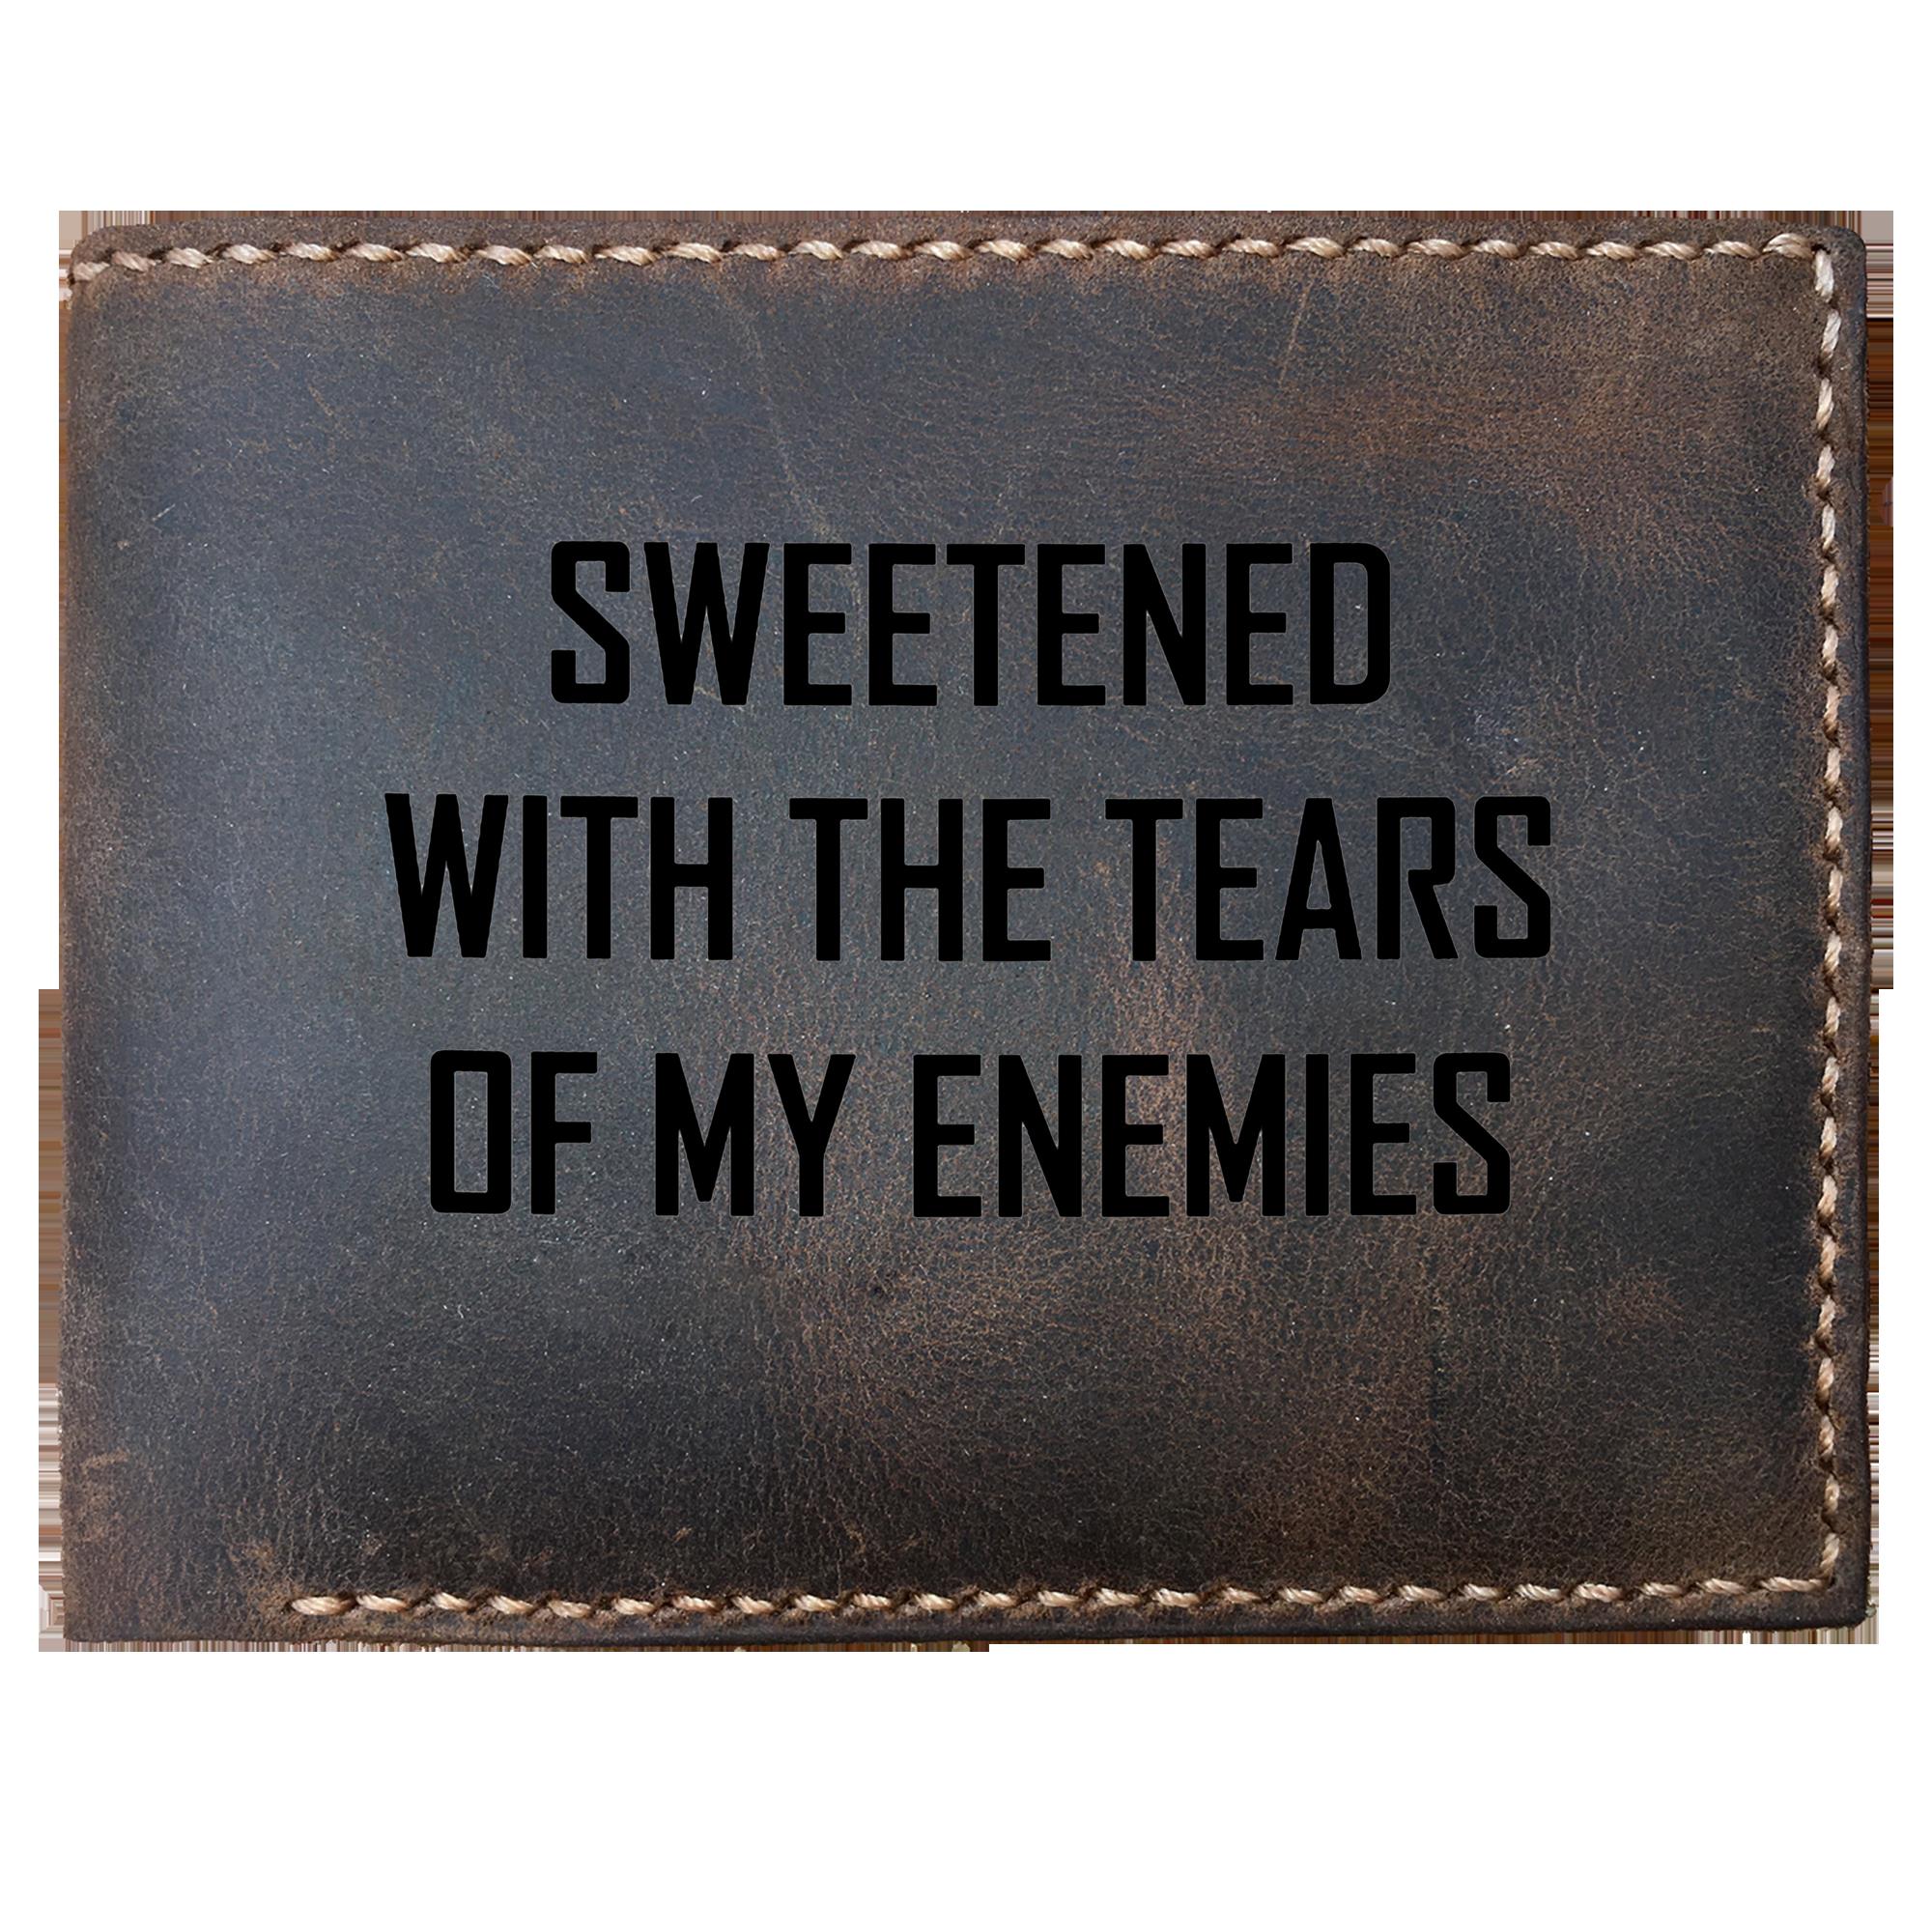 Skitongifts Funny Custom Laser Engraved Bifold Leather Wallet For Men, Sweetened With The Tears Of My Enemies